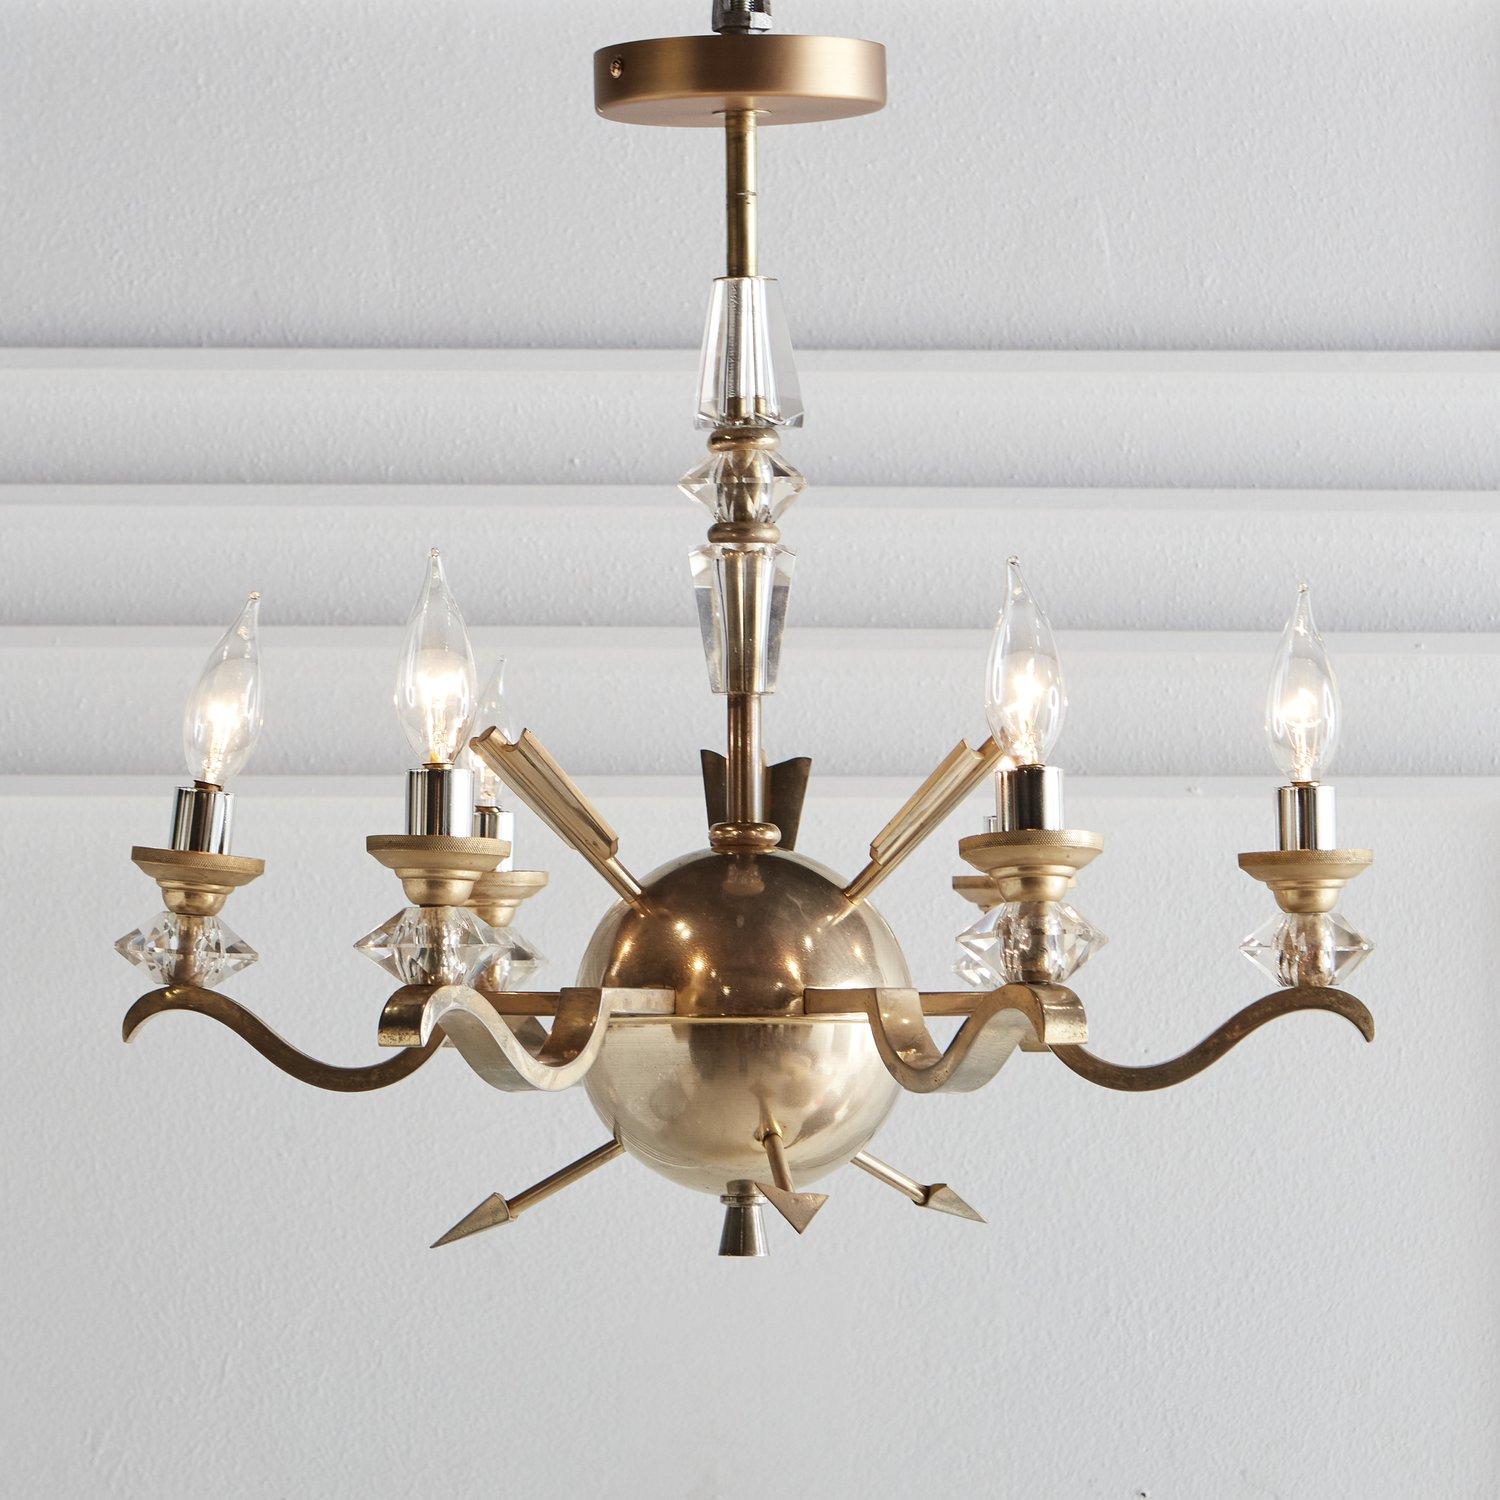 A vintage brass chandelier sourced in France featuring arrow motifs and faceted crystal details. This chandelier has a spherical body with six unique curved arms and chrome candle sleeves with brass bobeches. Early 20th Century.